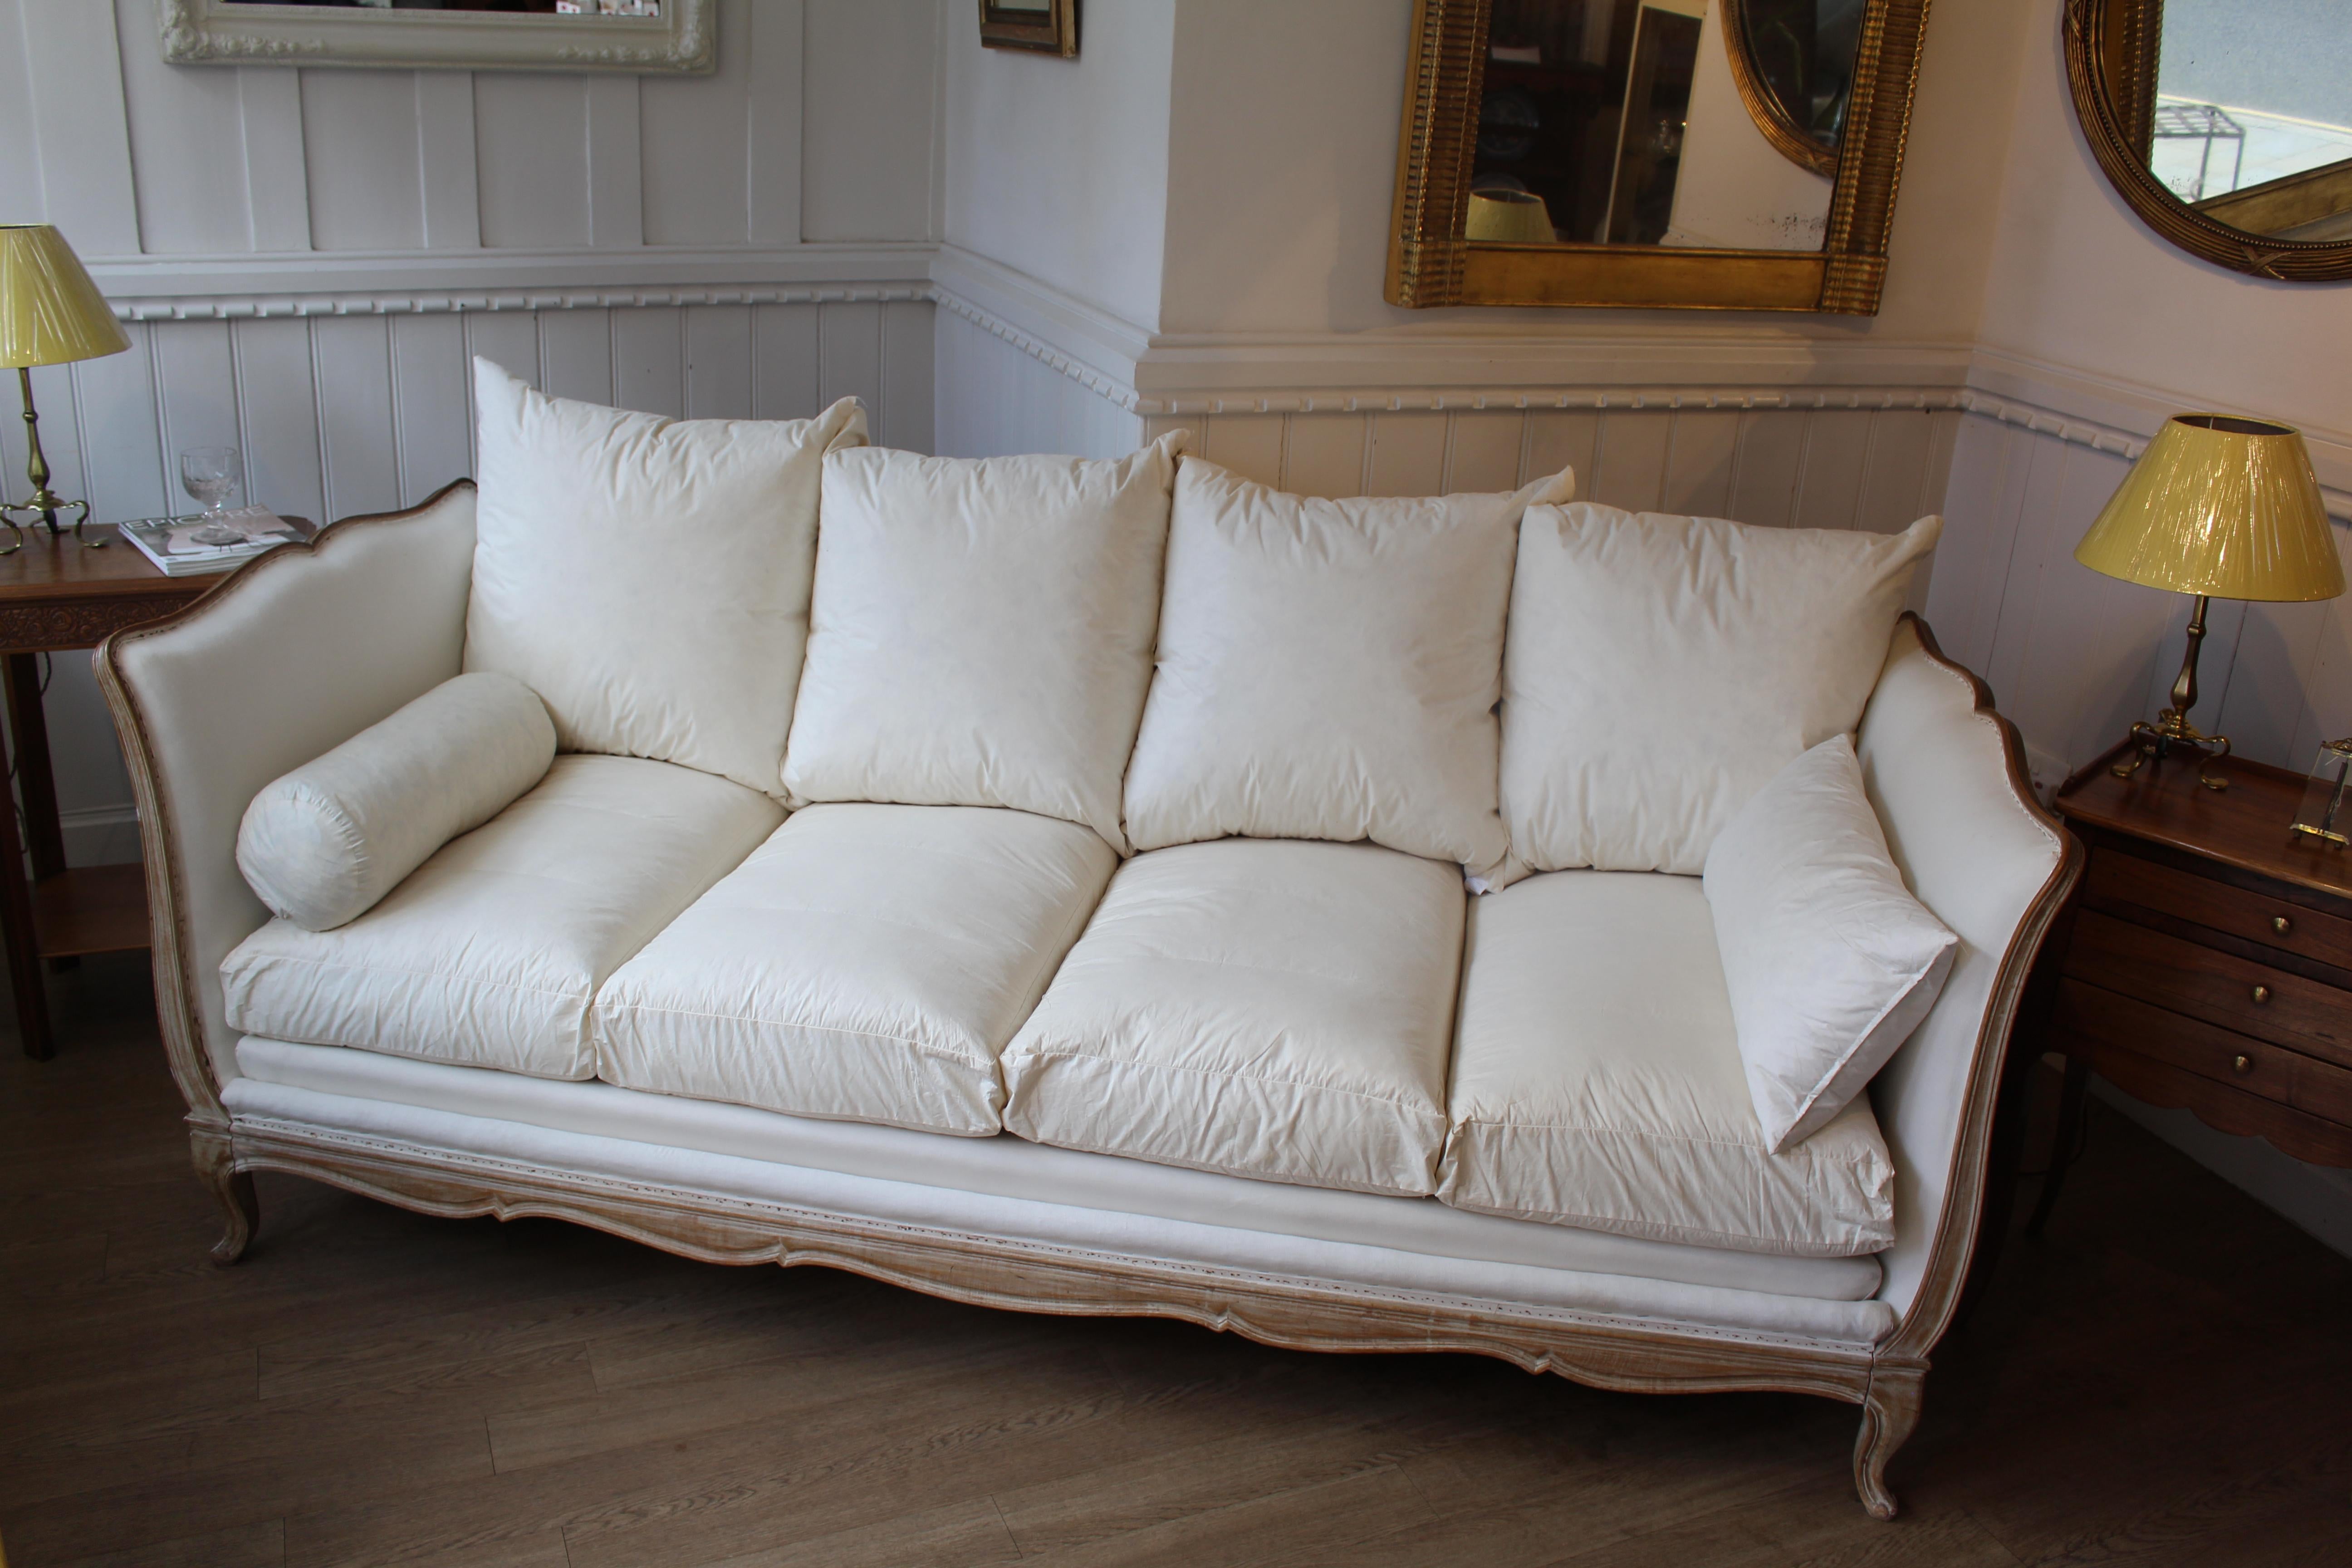 Serpentine Wooden 20th Century Daybed Sofa Centre Bench Bed Louis XV Style In Good Condition For Sale In Dorking, Surrey